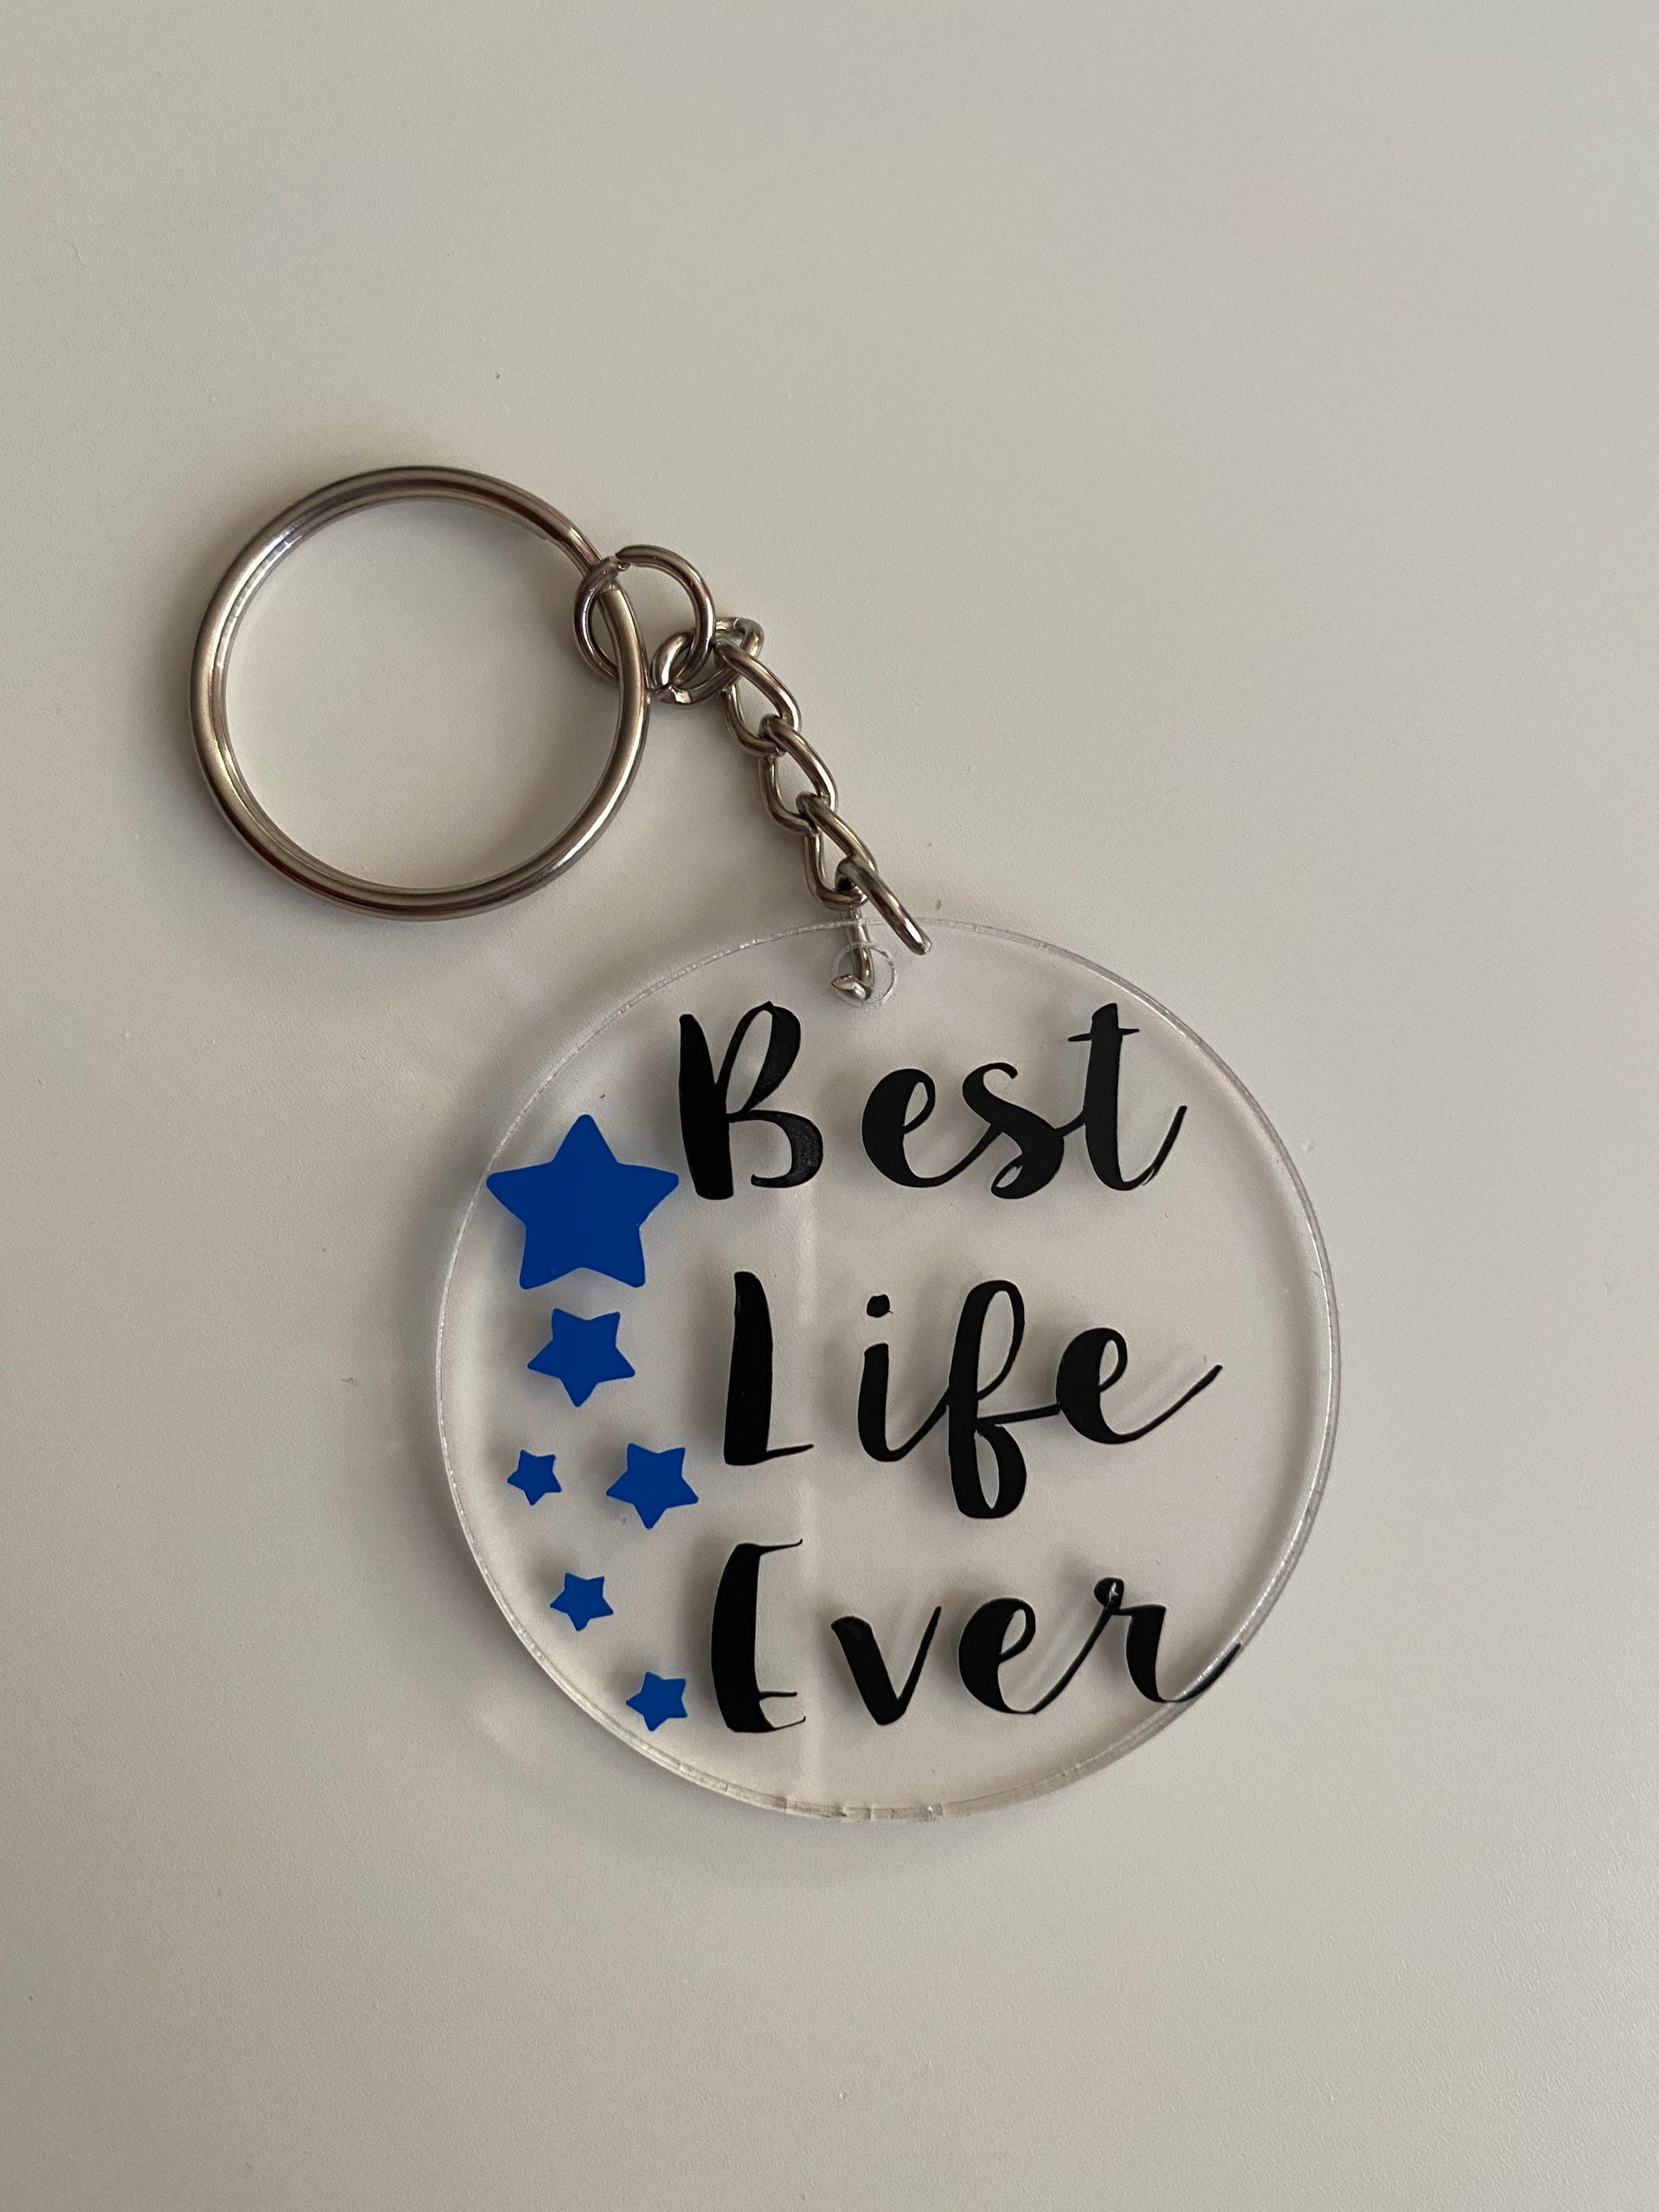 MYOSPARK Baptism Gift Best Life Ever Keychain JW Gifts JW Pioneer Gifts JW Ministry Supplies Pioneer School Gift JW Baptism Gift, Adult Unisex, Size